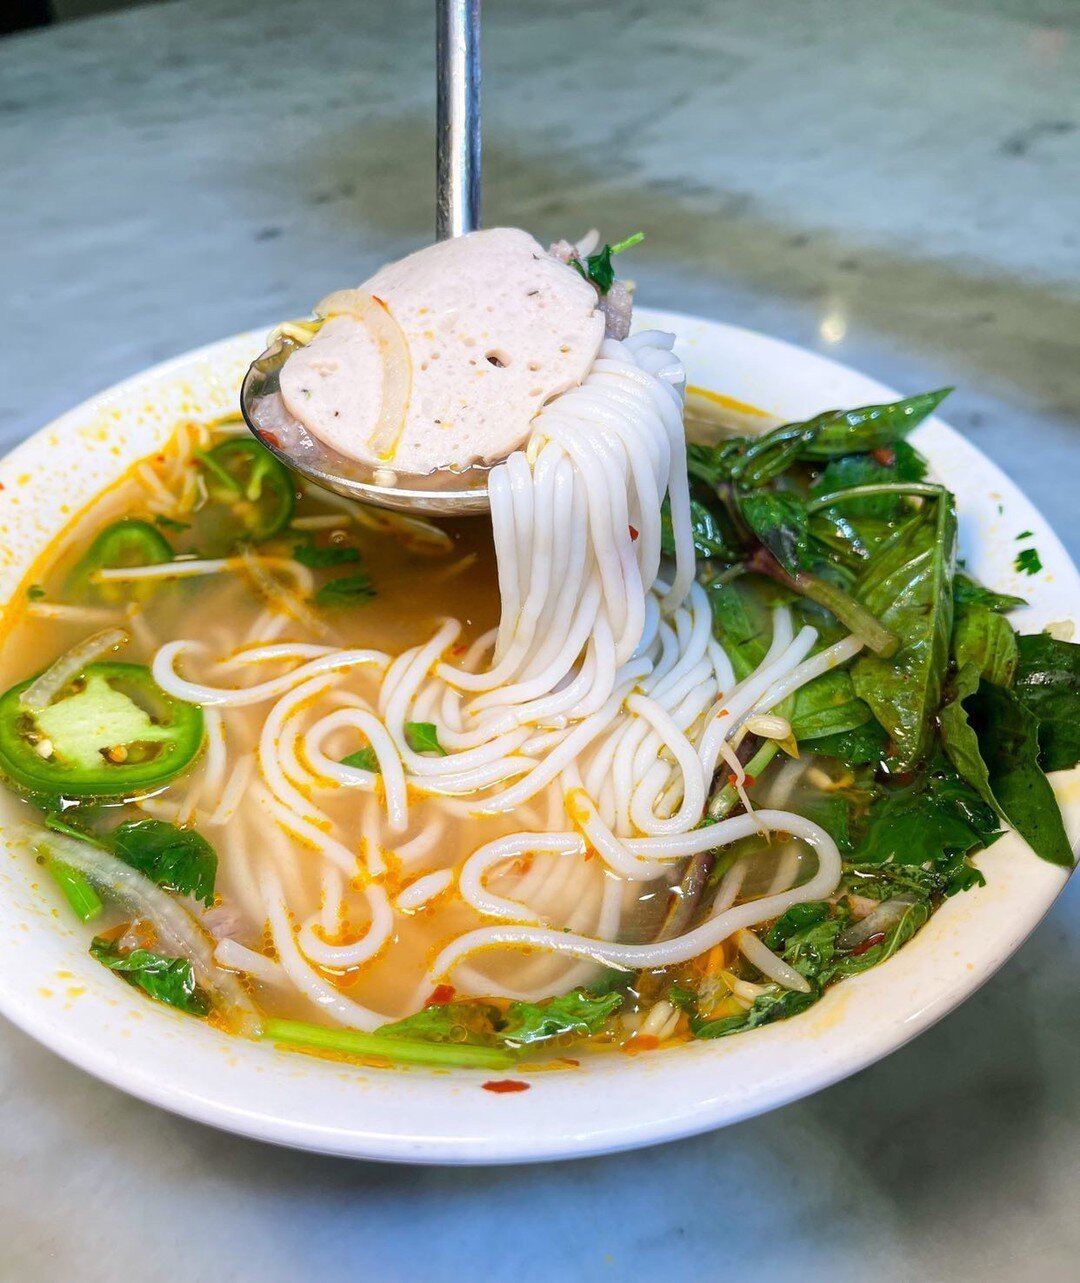 Don't get PhoMO - book your September New Orleans Culinary Immersive Tour today and dine at the best places in NOLA, like Pho Tau Bay. 

📸 : @princesa_wolf_eats
.
.
.
#thenewculinarian #culinaryarts #culinary #cheflife #chef #foodie #food #foodporn 